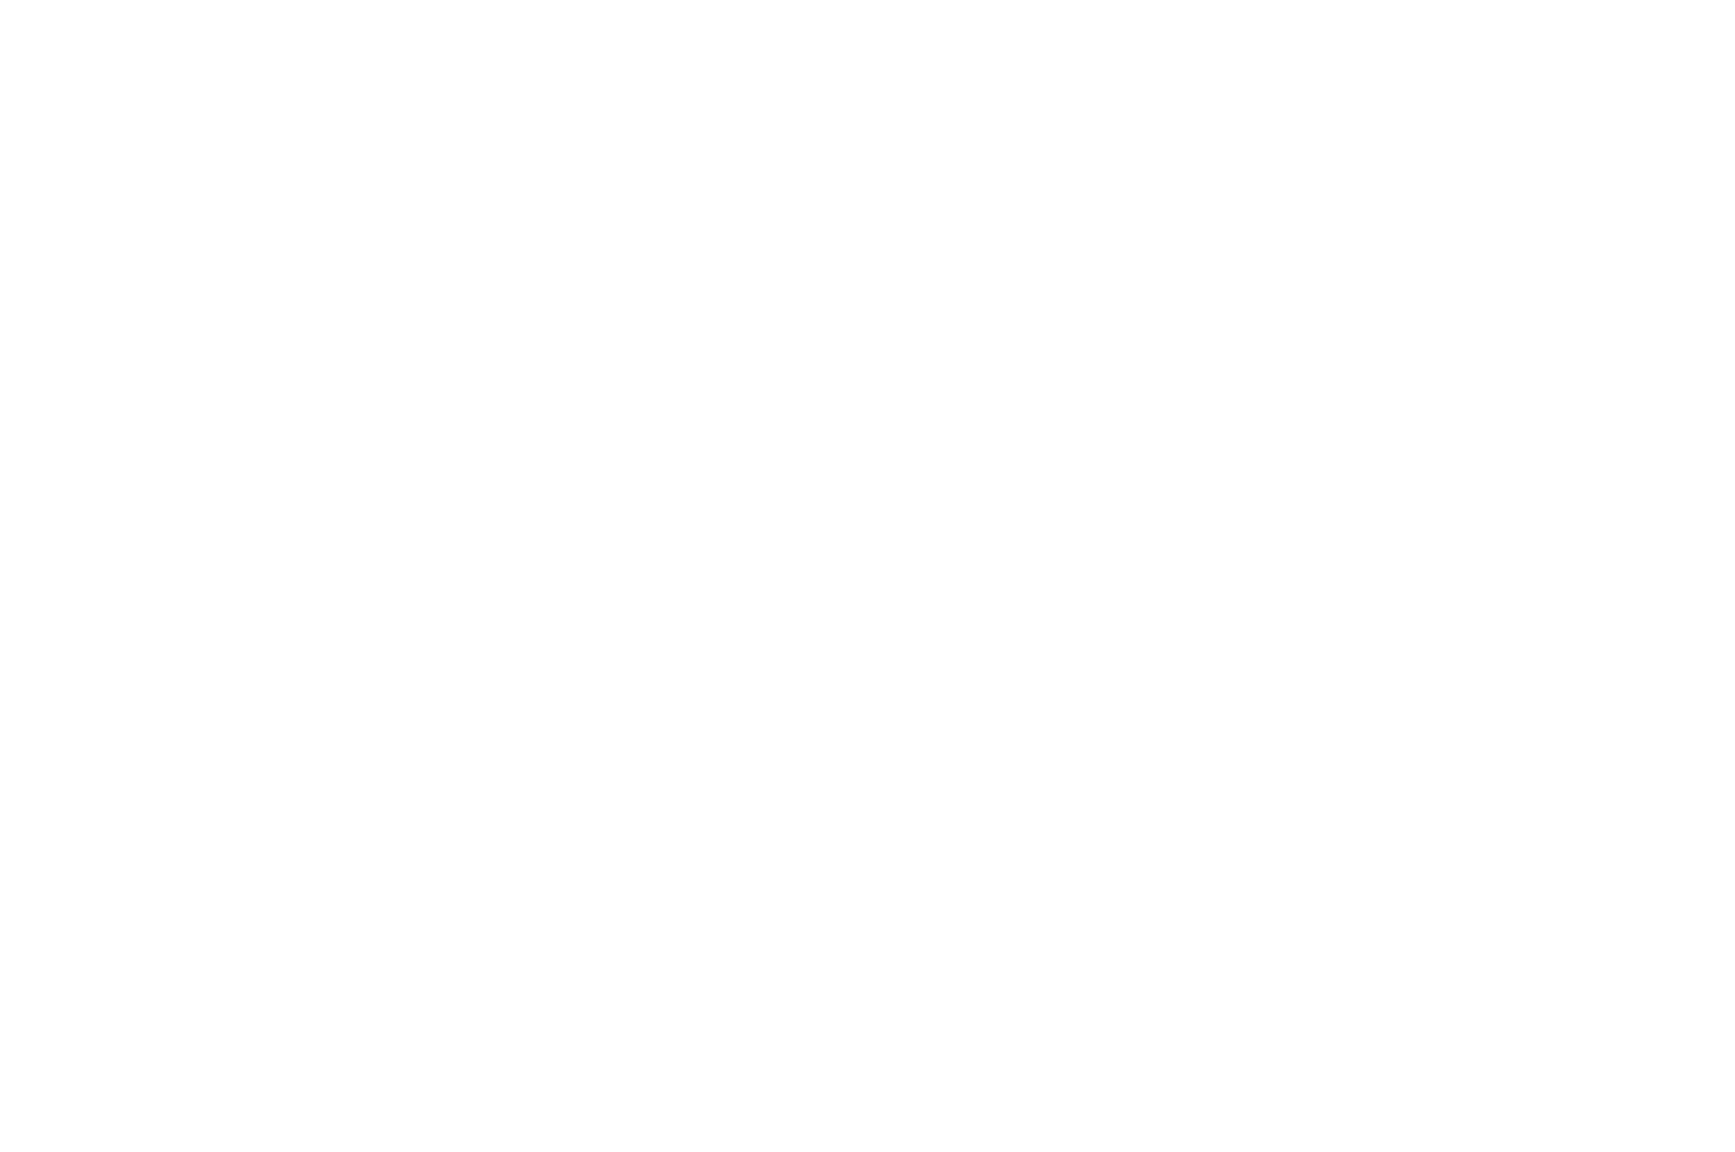 OFFICIAL SELECTION - Nice International Film Festival - 2019 (1).png